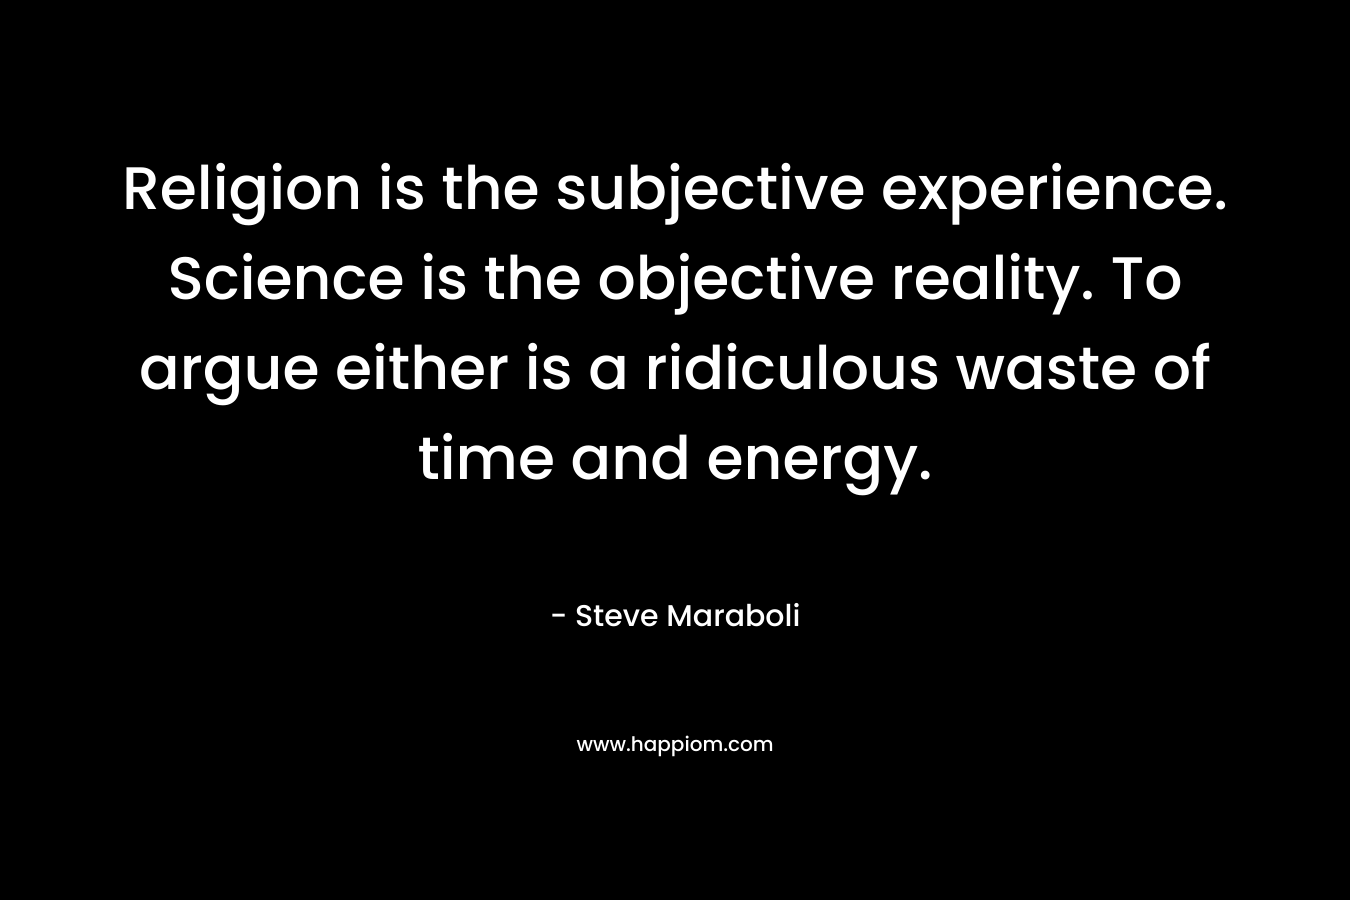 Religion is the subjective experience. Science is the objective reality. To argue either is a ridiculous waste of time and energy.